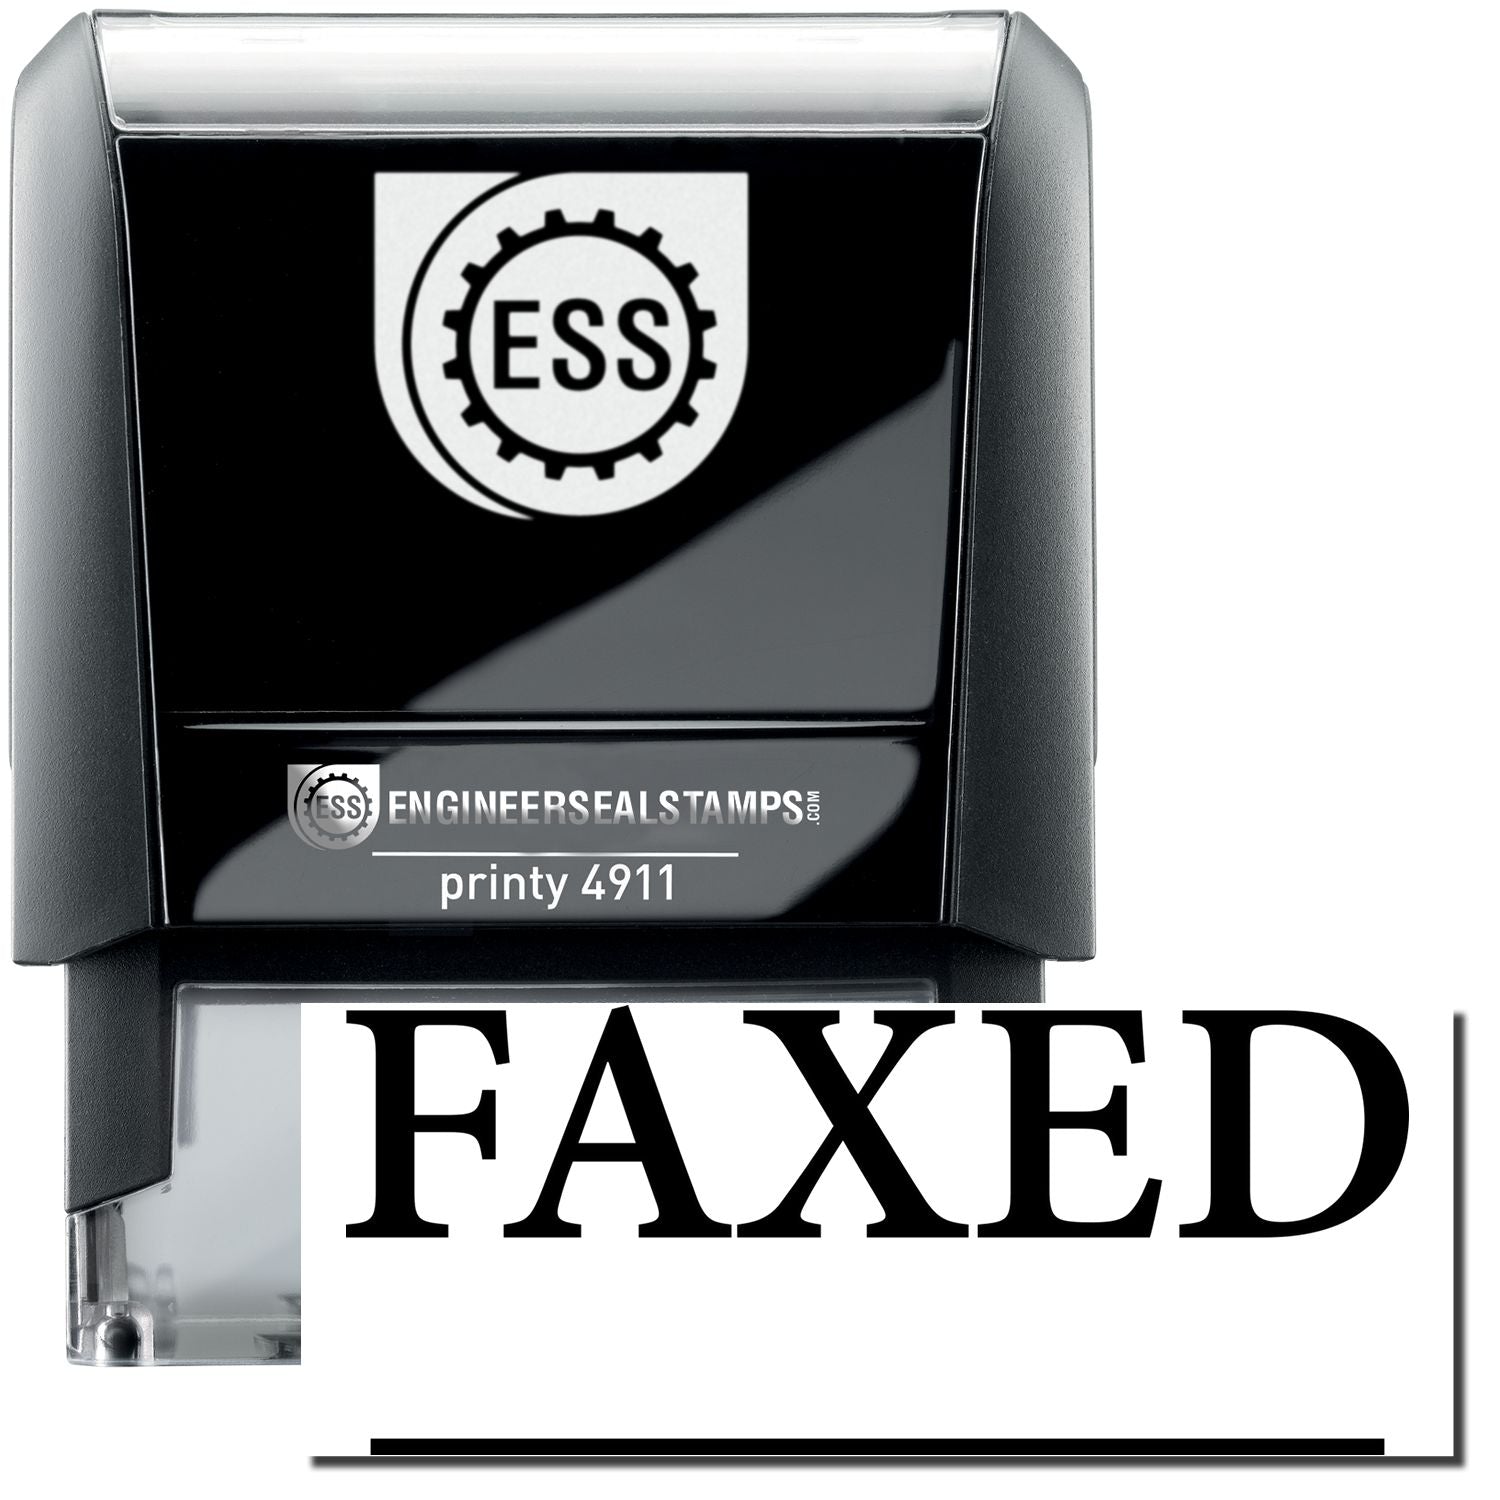 A self-inking stamp with a stamped image showing how the text "FAXED" in a times font with a line under it is displayed after stamping.